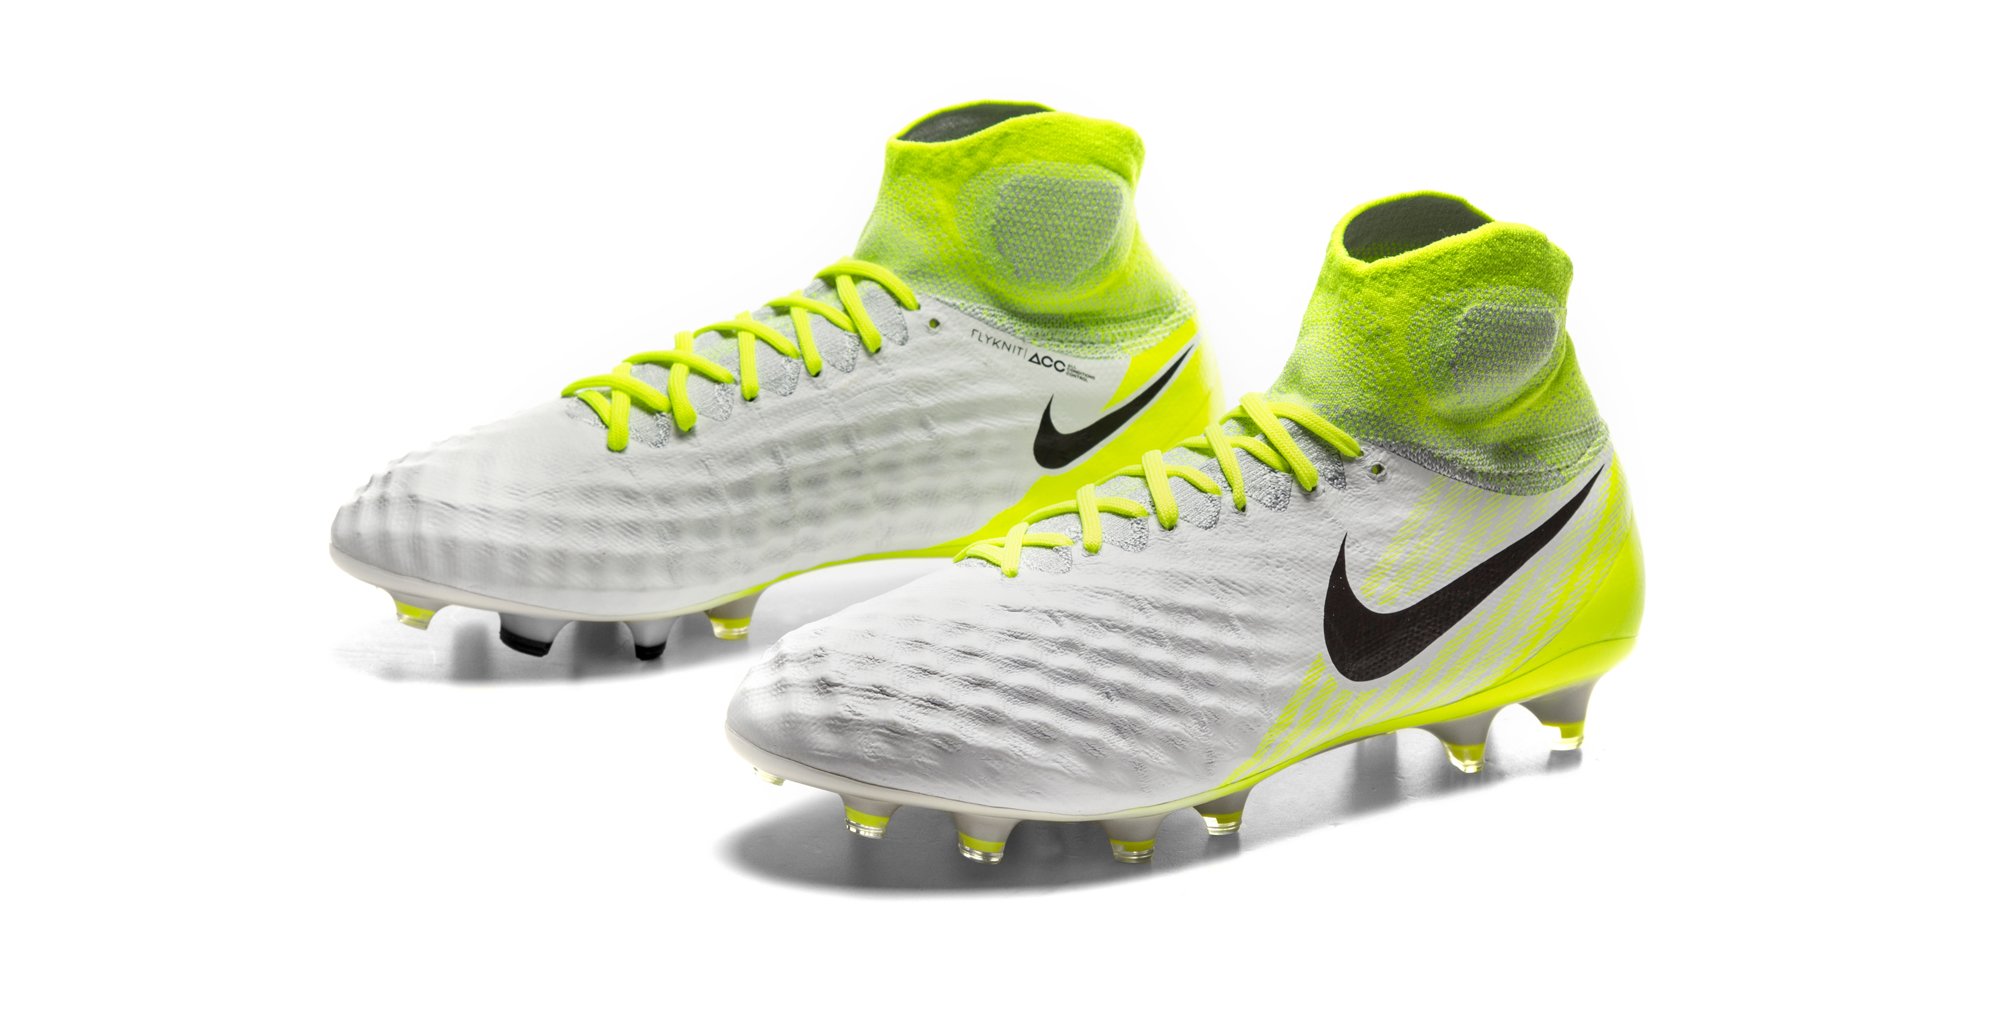 Nike Men's Magistax Proximo II Dynamic Fit Indoor 